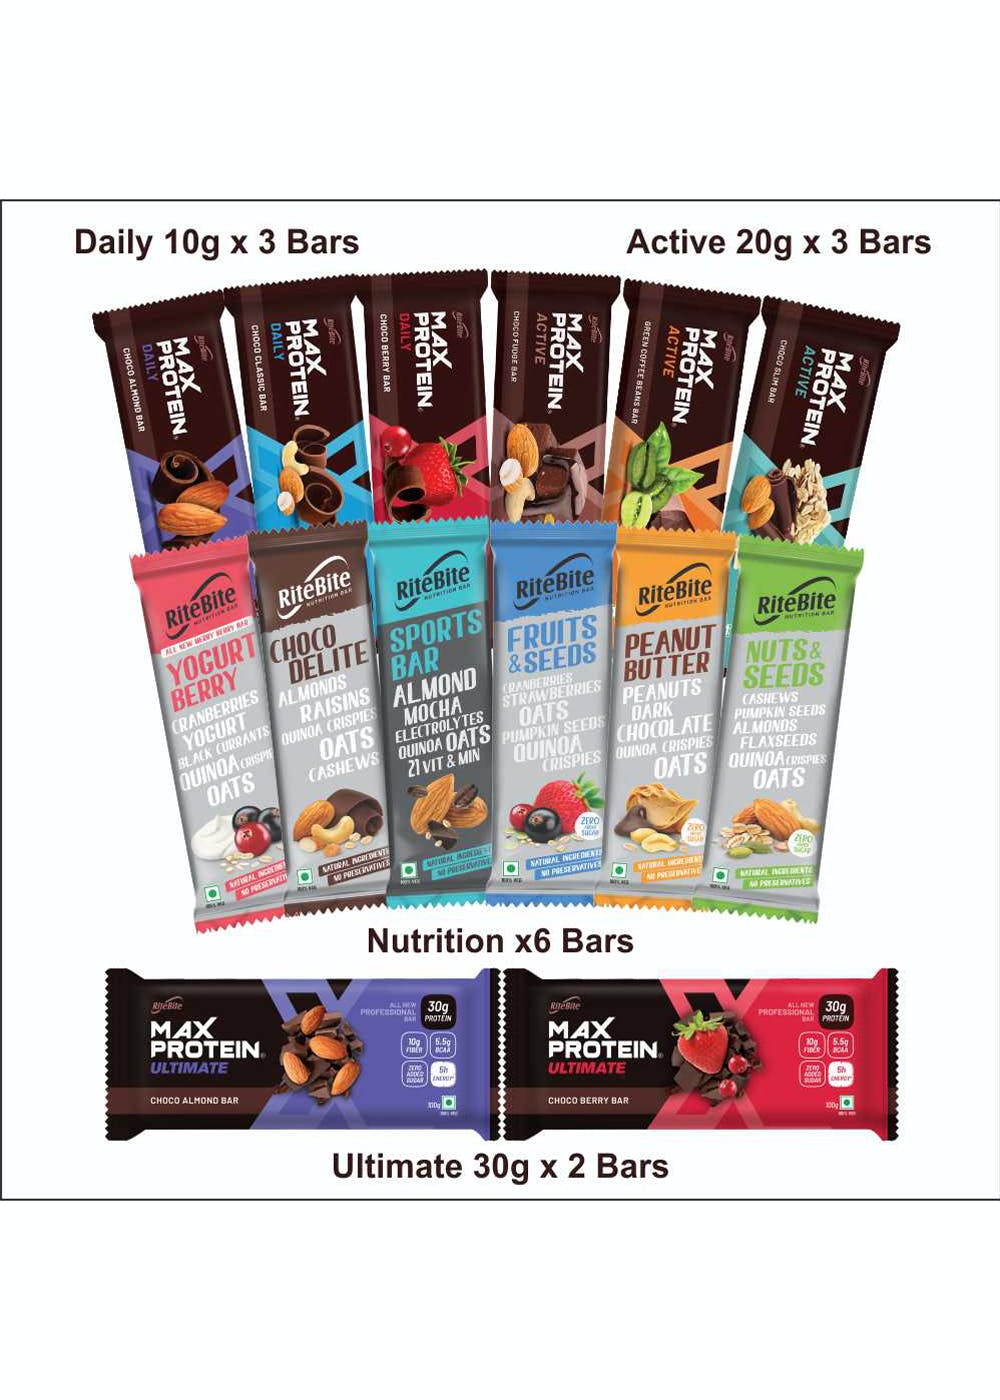 Pack of 14 Max Protein & Ritebite Assorted Pack, 787g (CD,YB,PB,NS,SP,FS,CC,CB,CA,CS,CF,GC UCB, UCA) (1 Each)